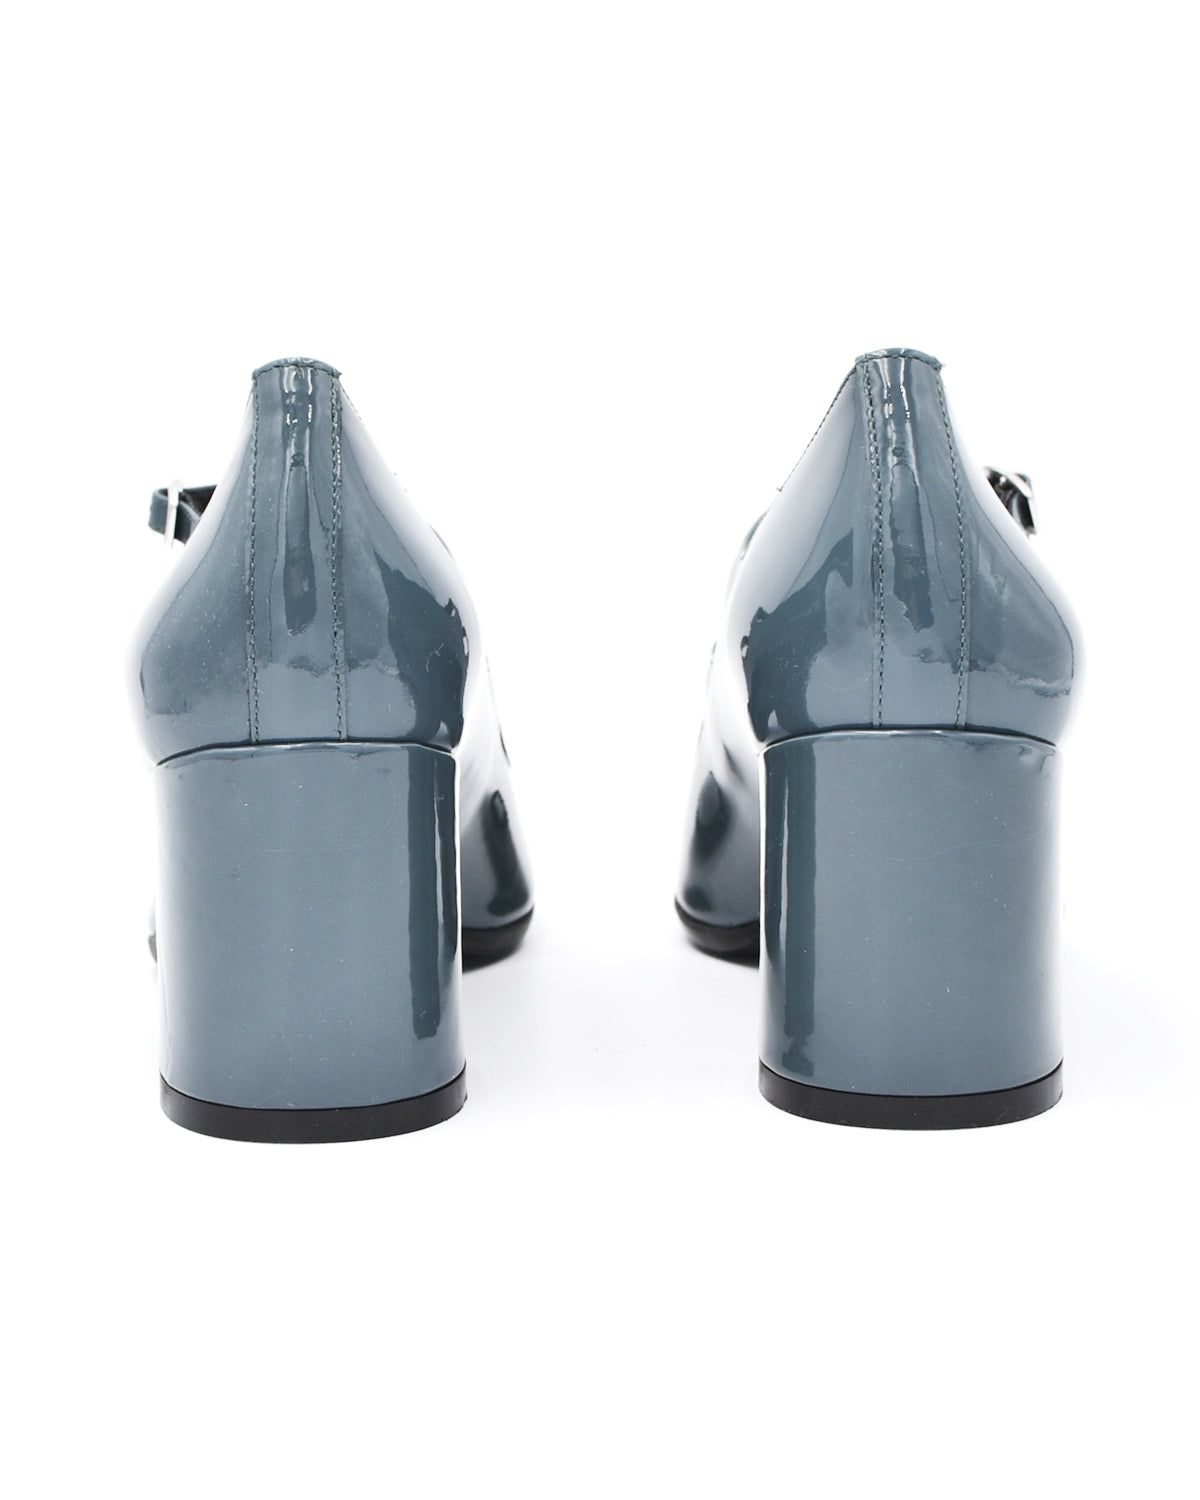 Carel Alice Blue Grey Patent Two Strap Mary Jane